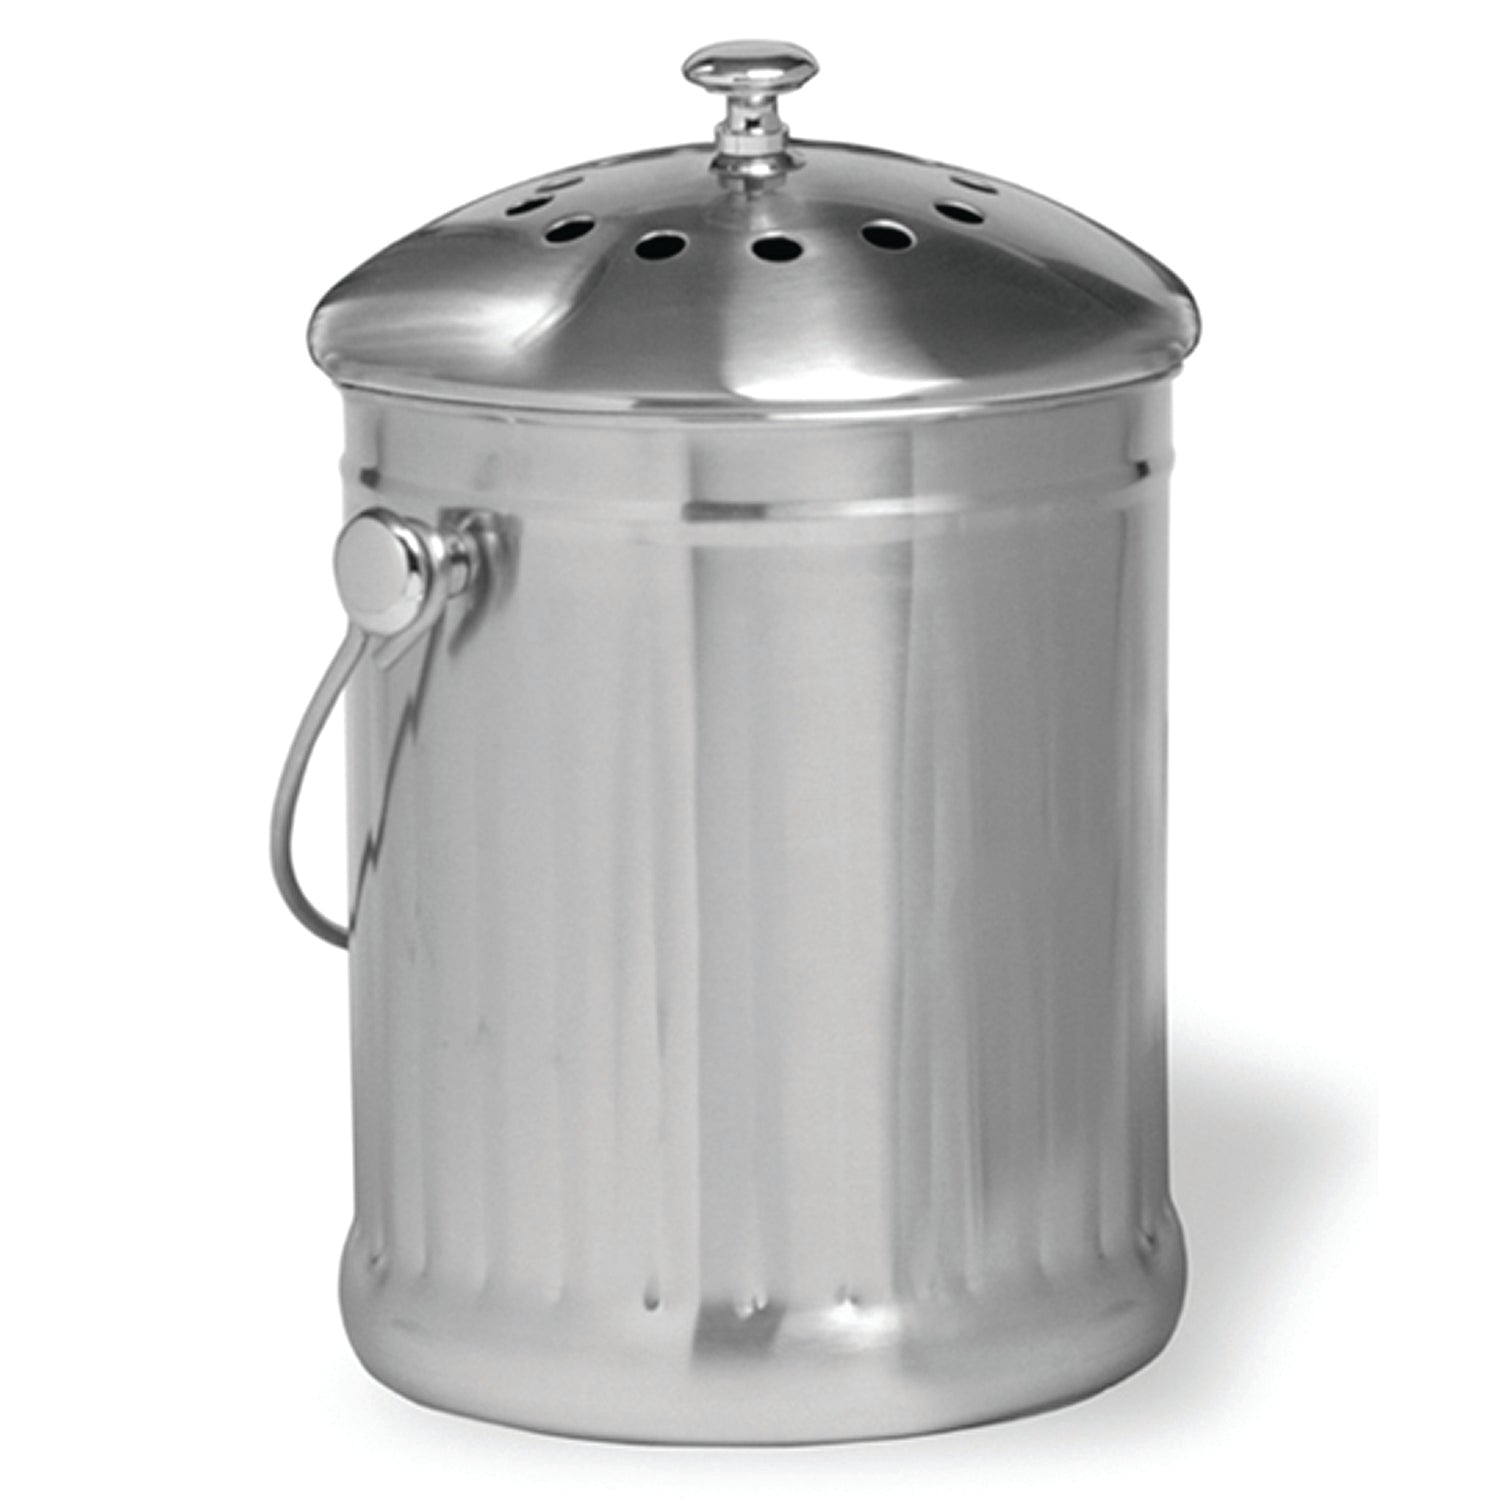 1-GALLON STAINLESS STEEL COMPOST KEEPER